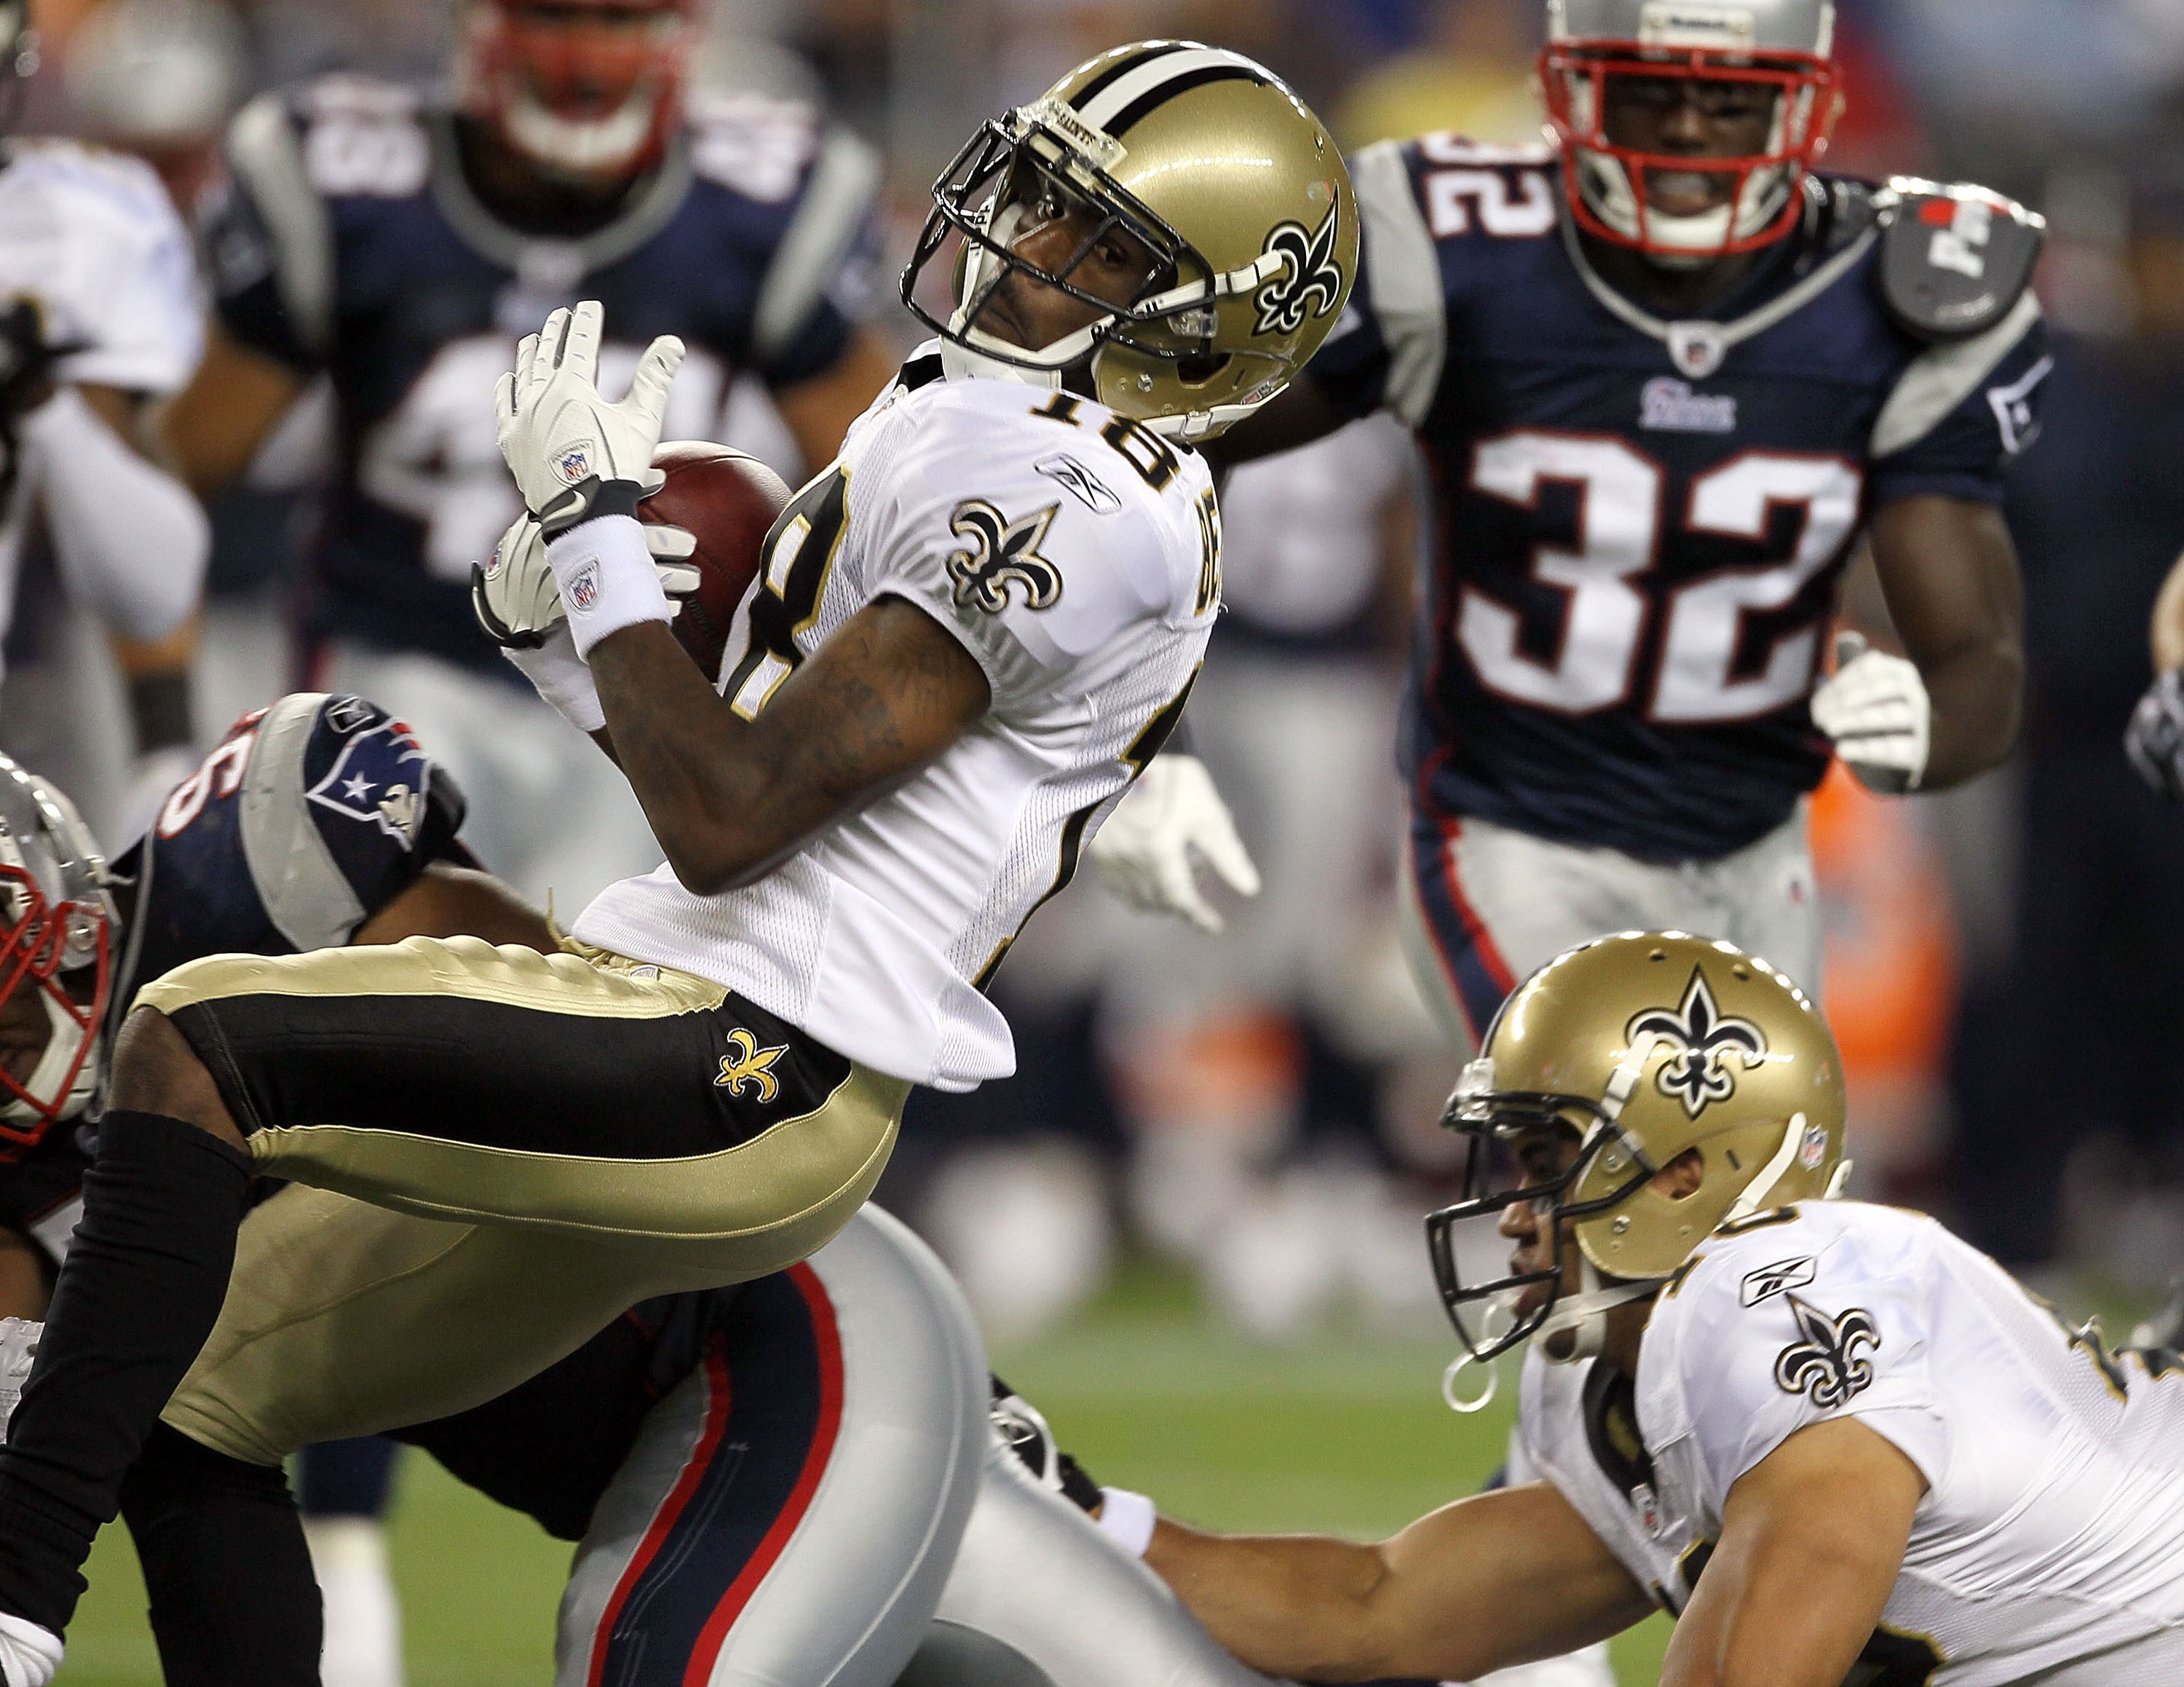 FOXBORO, MA - AUGUST 12: Larry Beavers # 18 of the New Orleans Saints gains yardage in the second half against the New England Patriots during the preseason game at Gillette Stadium on August 12, 2010 in Foxboro, Massachusetts. (Photo by Jim Rogash/Getty 